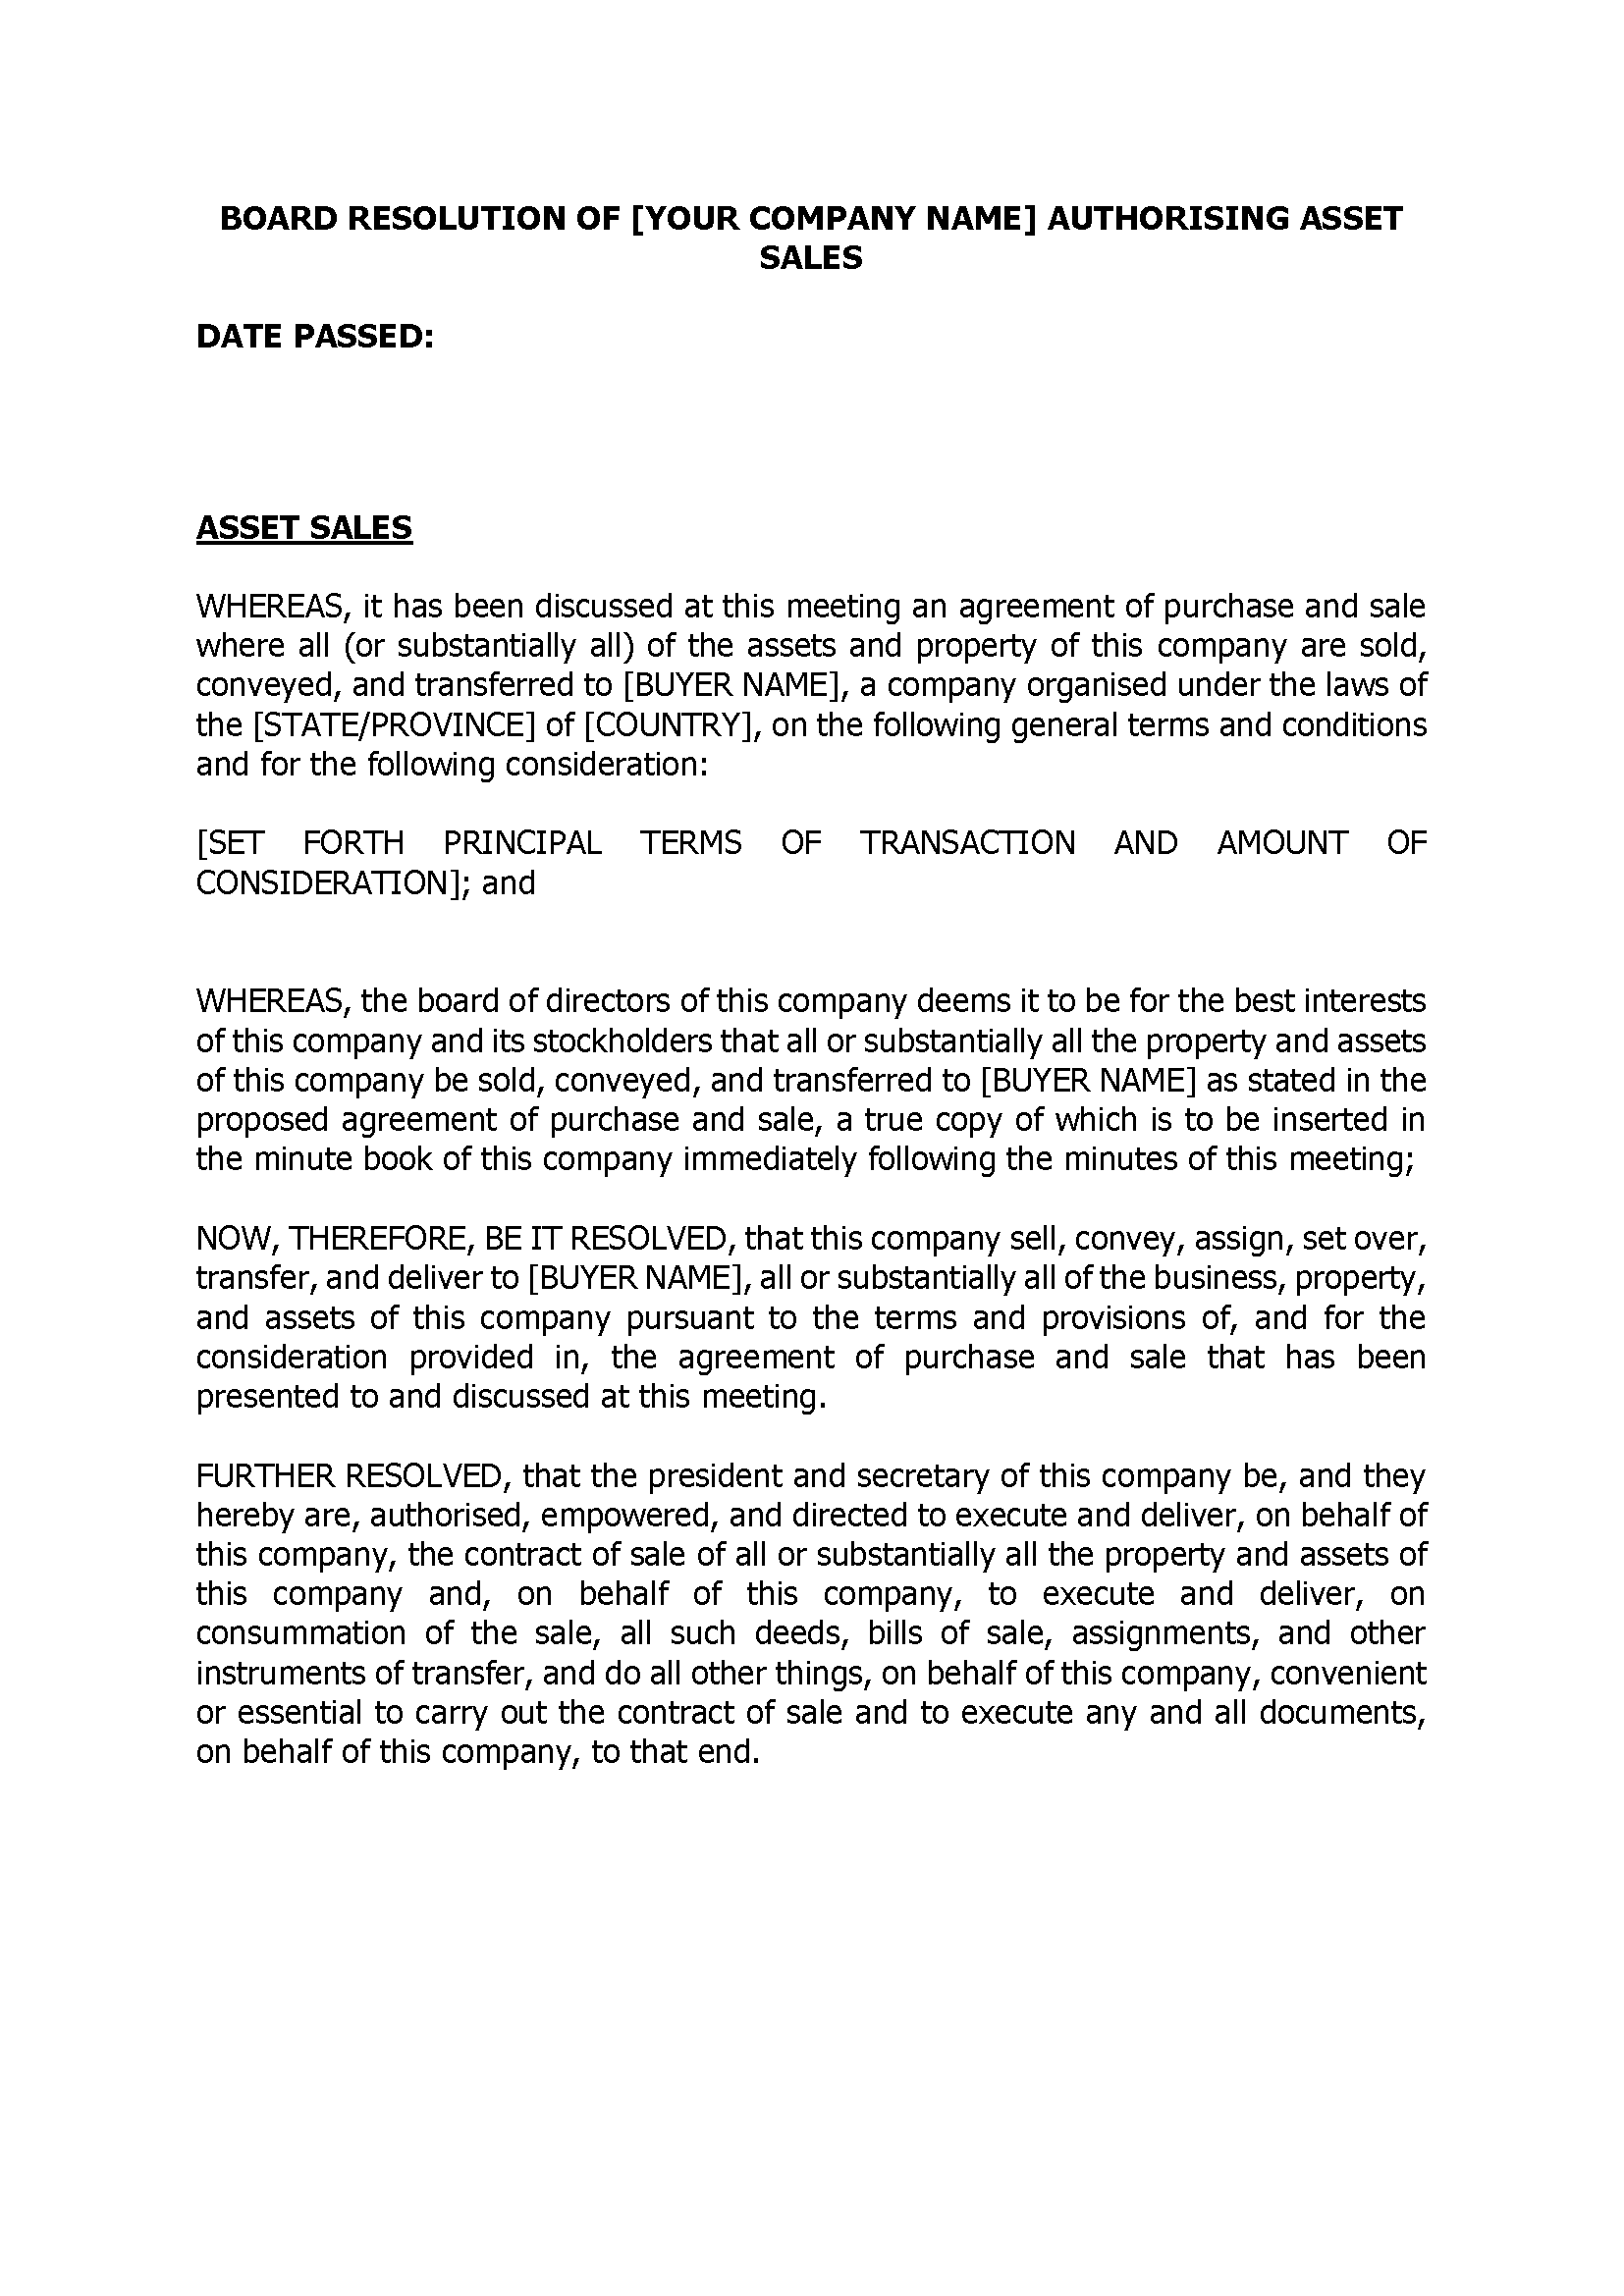 Board Resolution Of [Your Company Name] Authorising Asset Sales